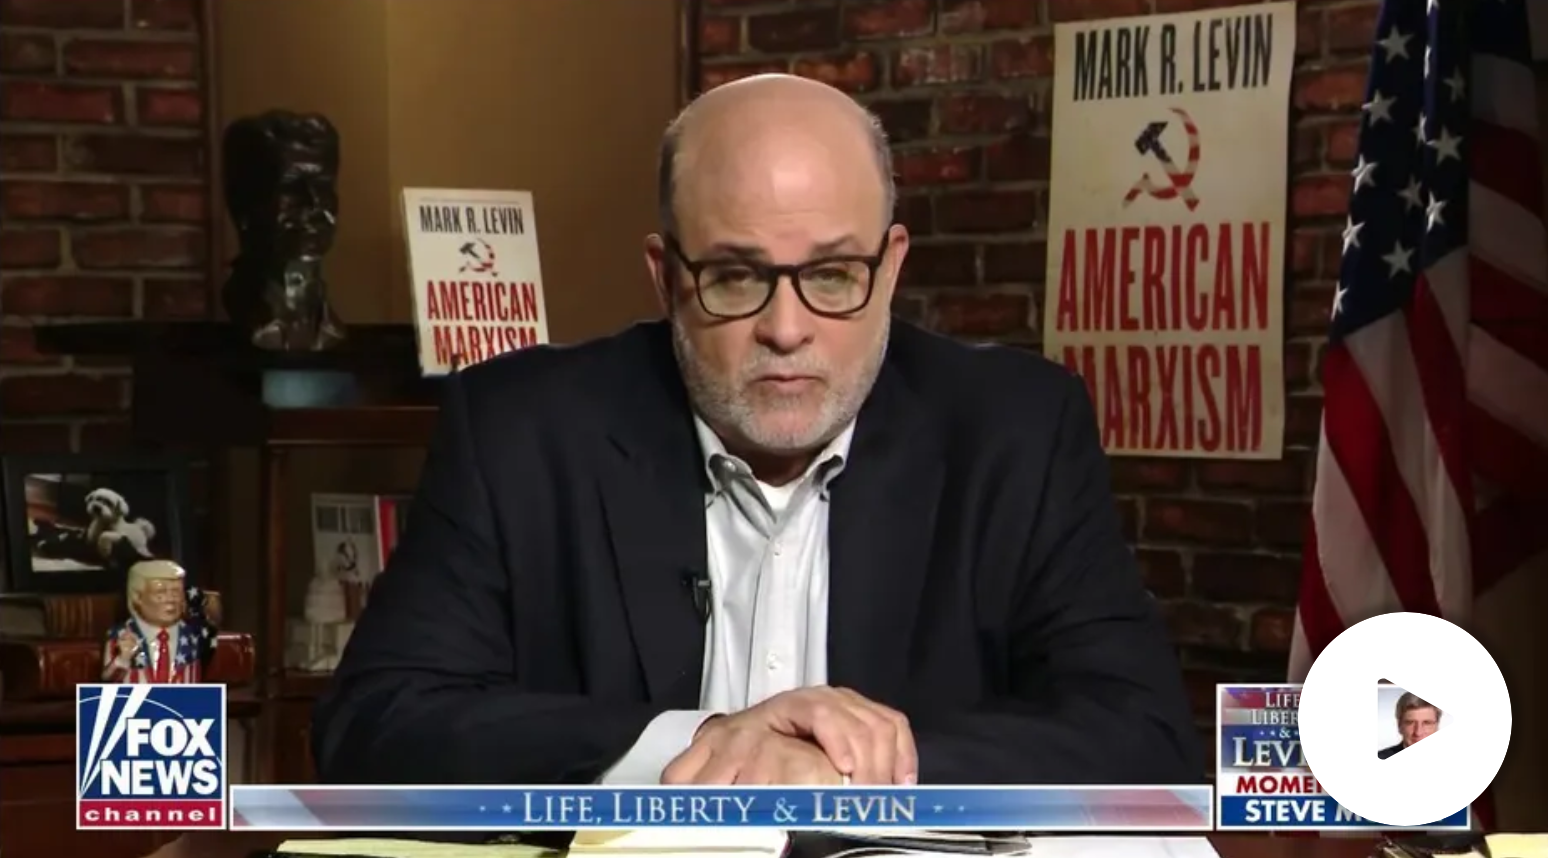 Mark Levin, a Fox News host, was ridiculed for claiming Americans were ‘freer’ before the Revolutionary War